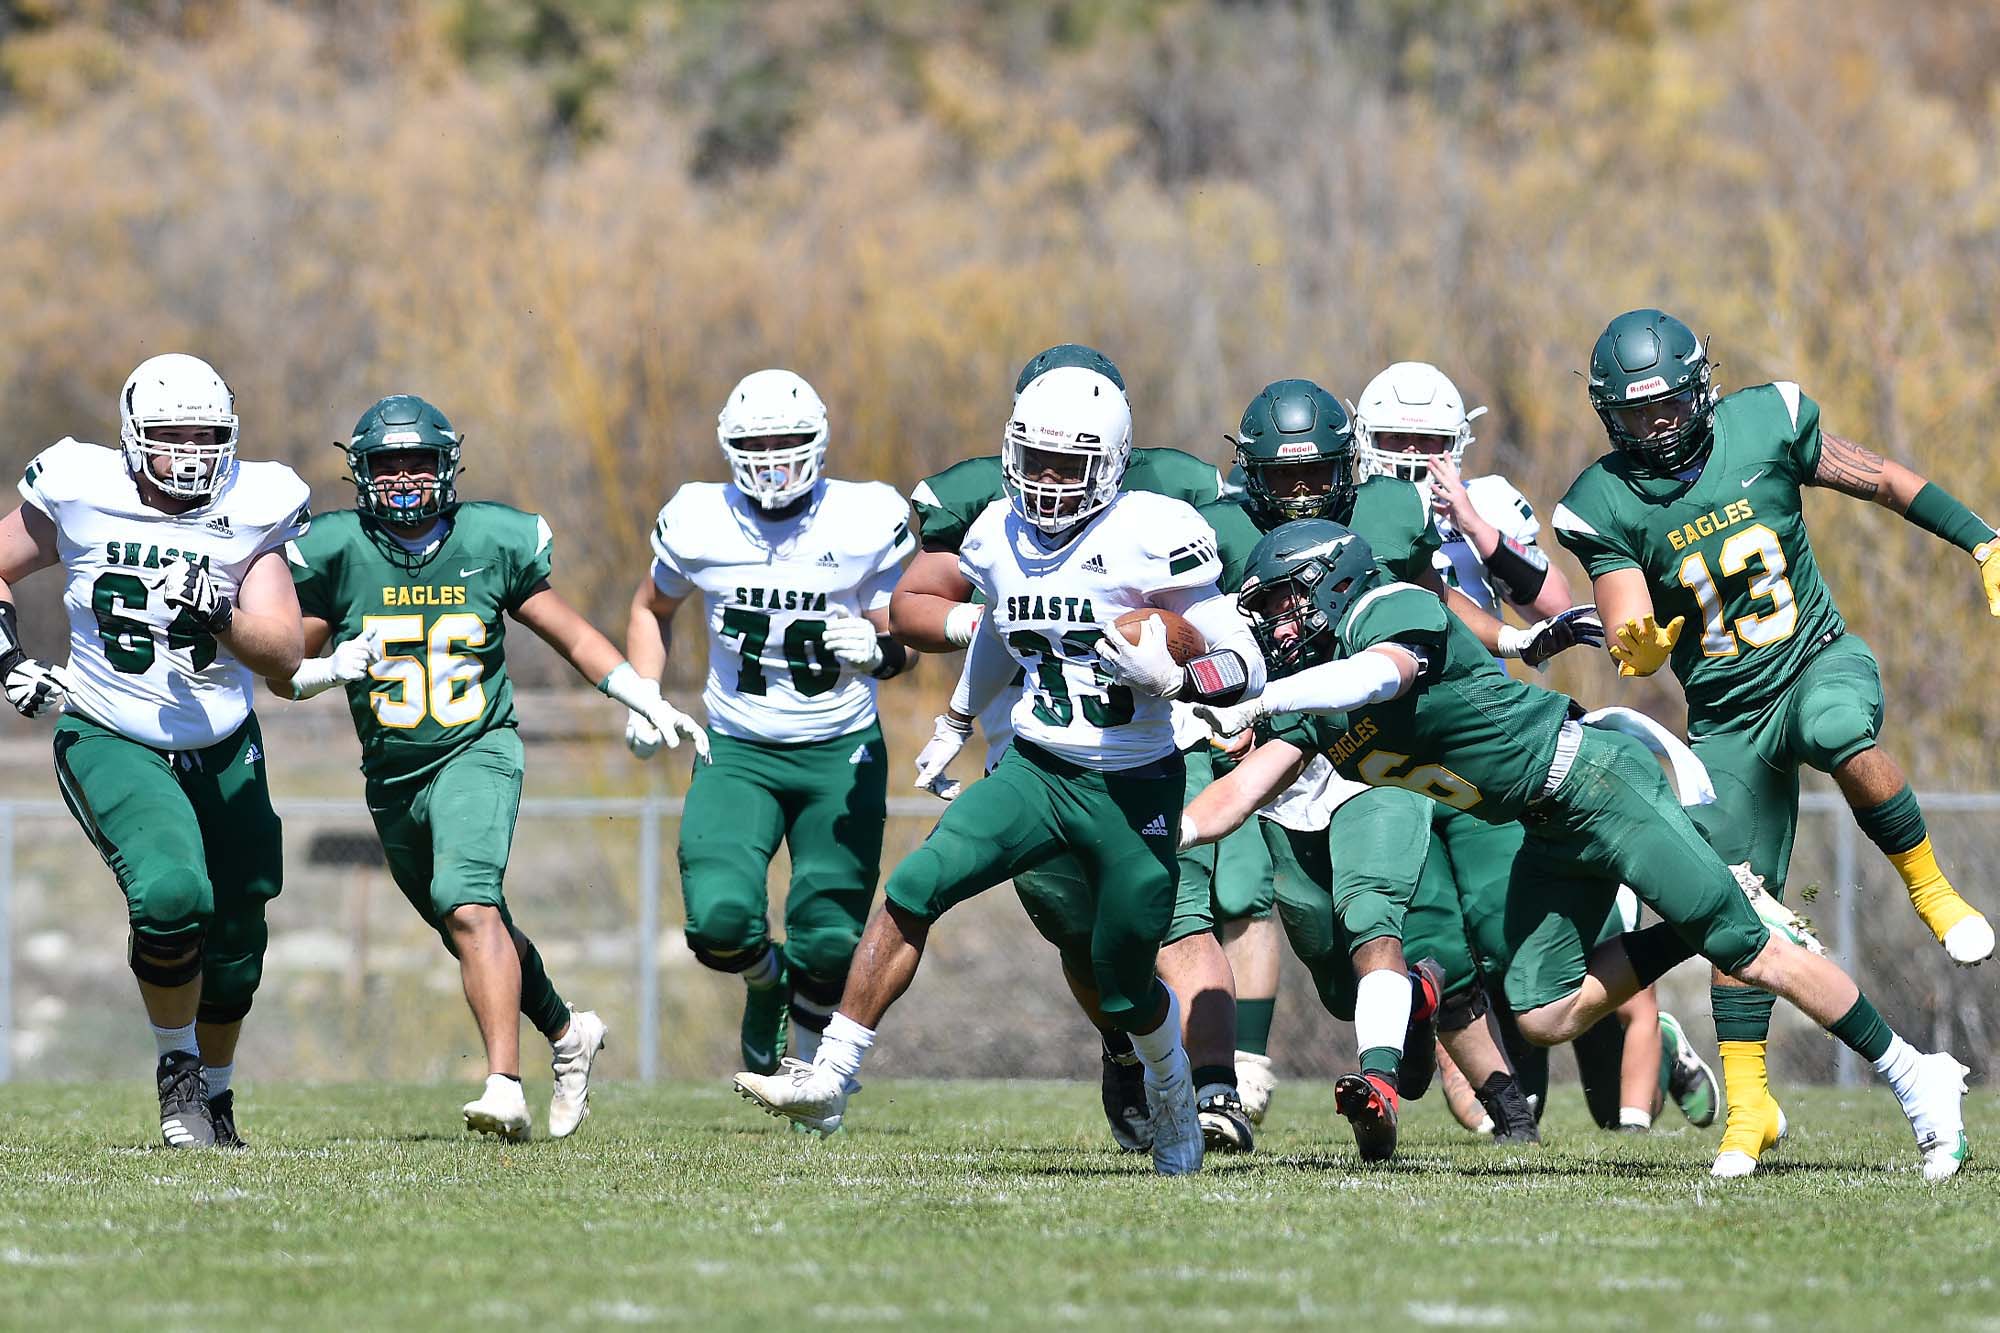 KNIGHTS RALLY IN FOURTH QUARTER TO TOP FEATHER RIVER 24-17